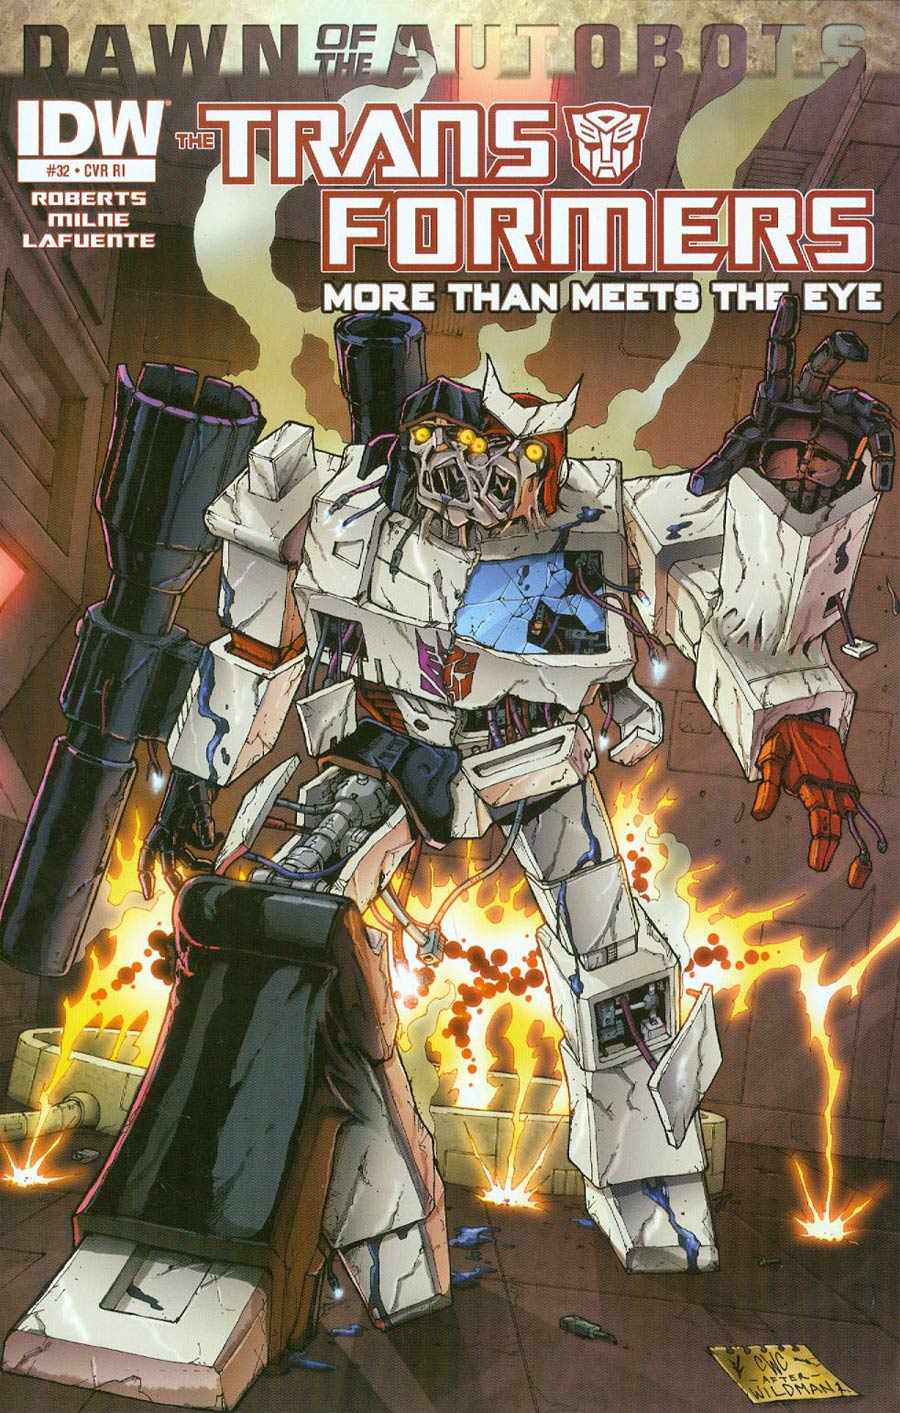 Transformers More Than Meets The Eye #32 Cover C Incentive Casey Coller 30th Anniversary Variant Cover (Dawn Of The Autobots Tie-In)